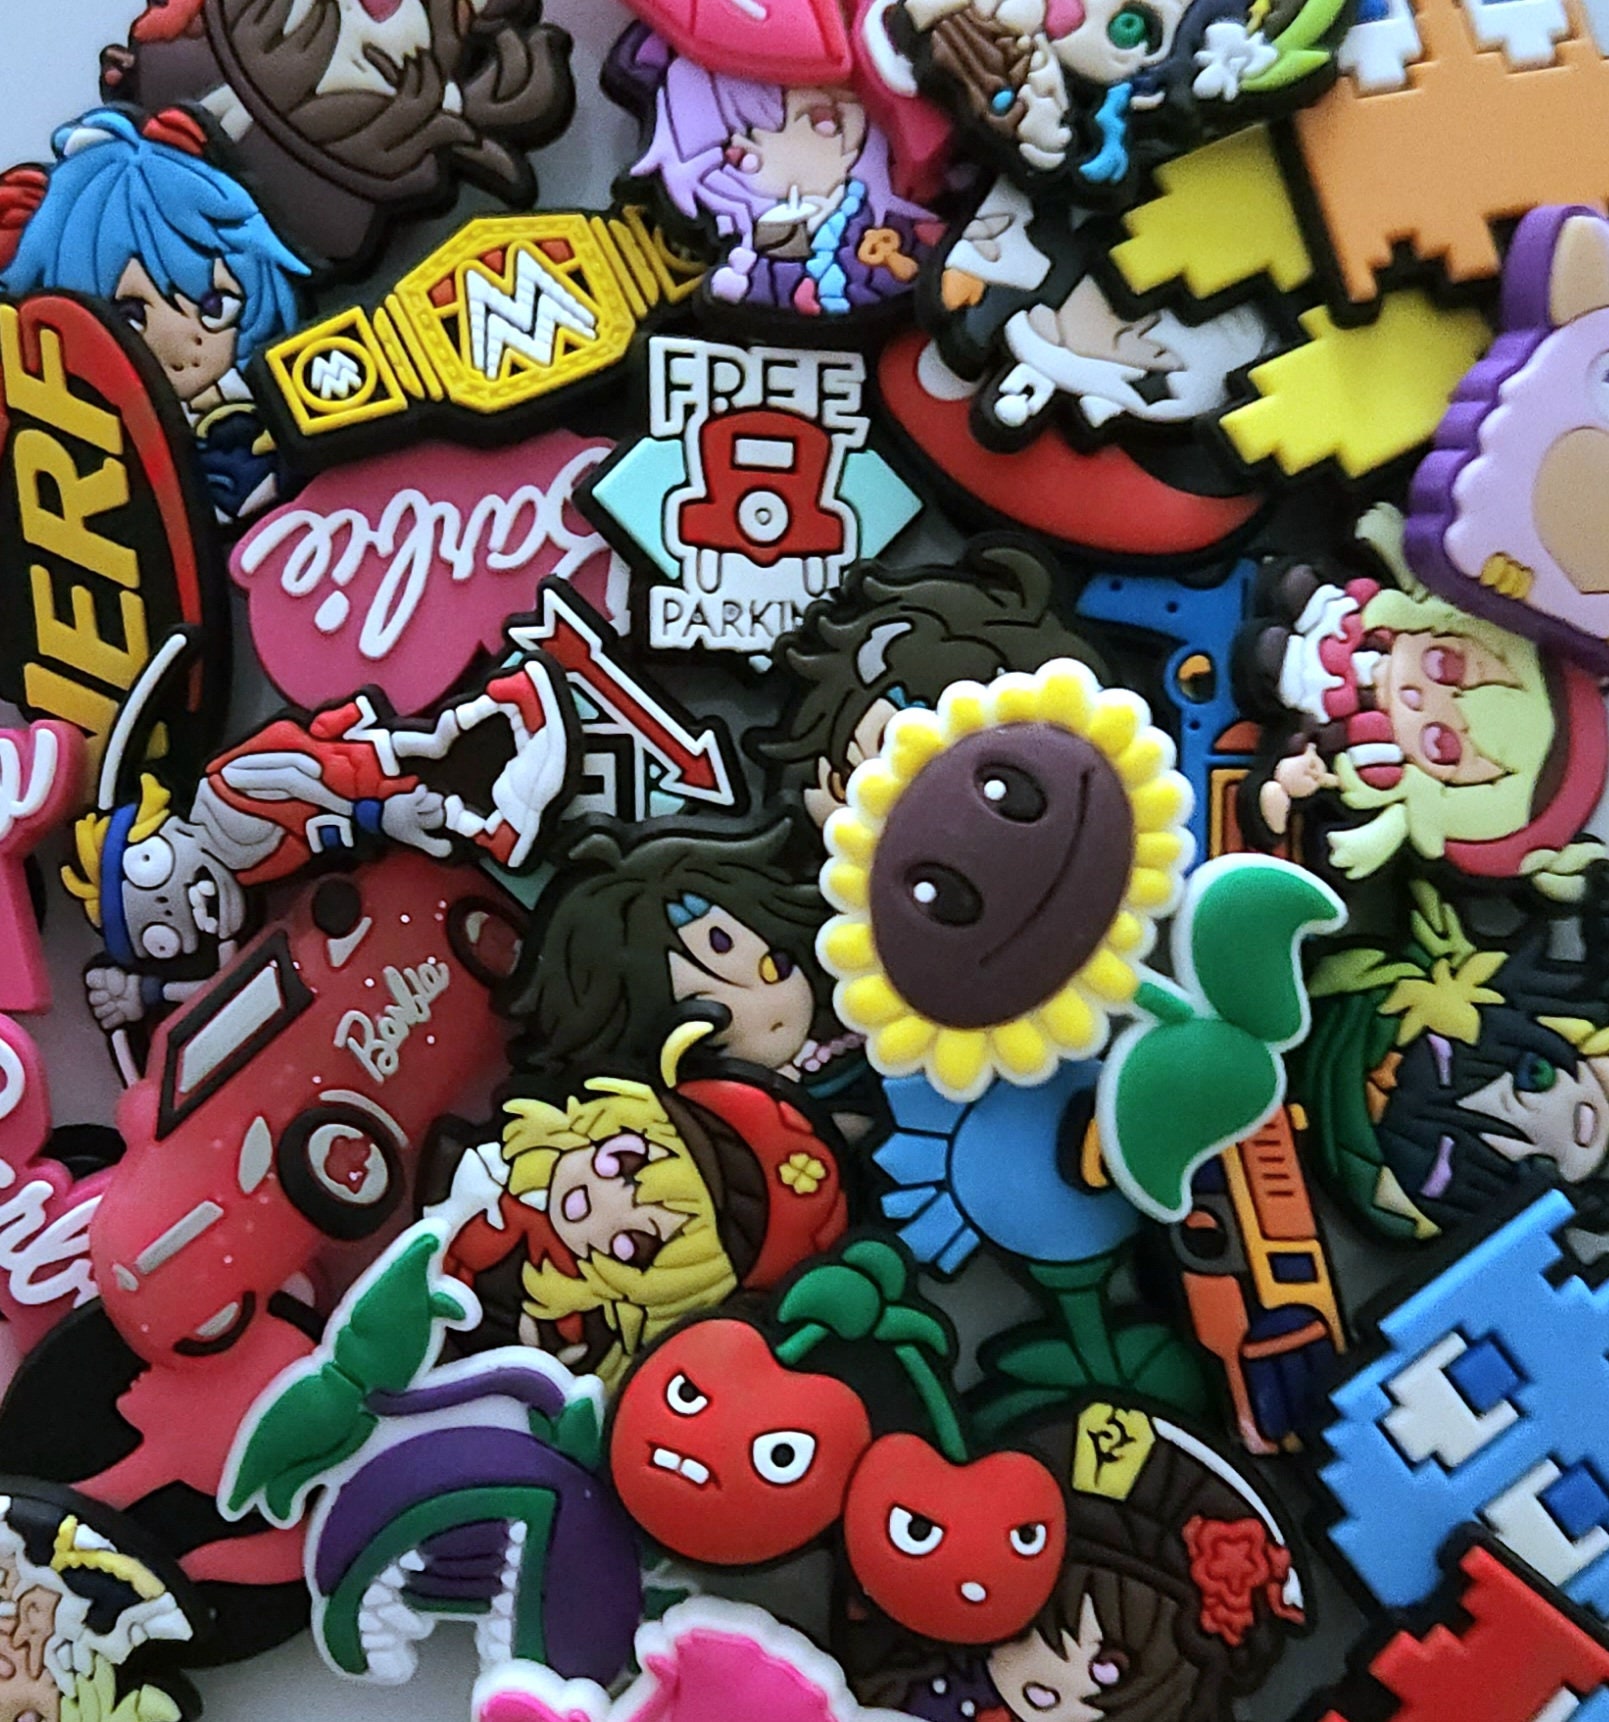 Job Roblox Pins and Buttons for Sale